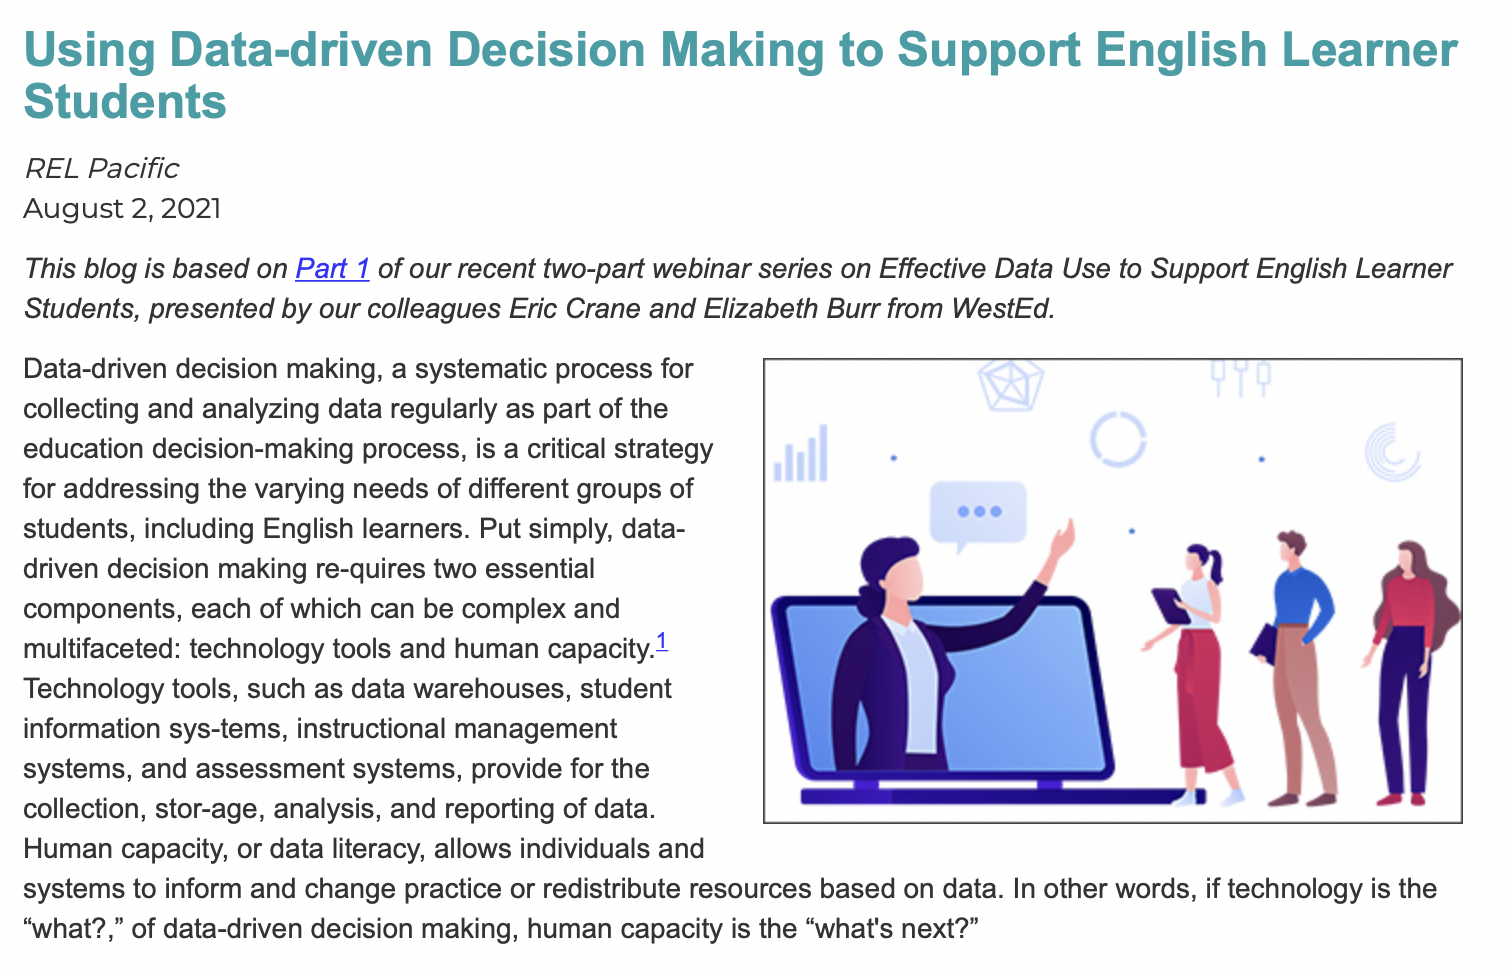 Using Data-driven Decision Making to Support English Learner Students